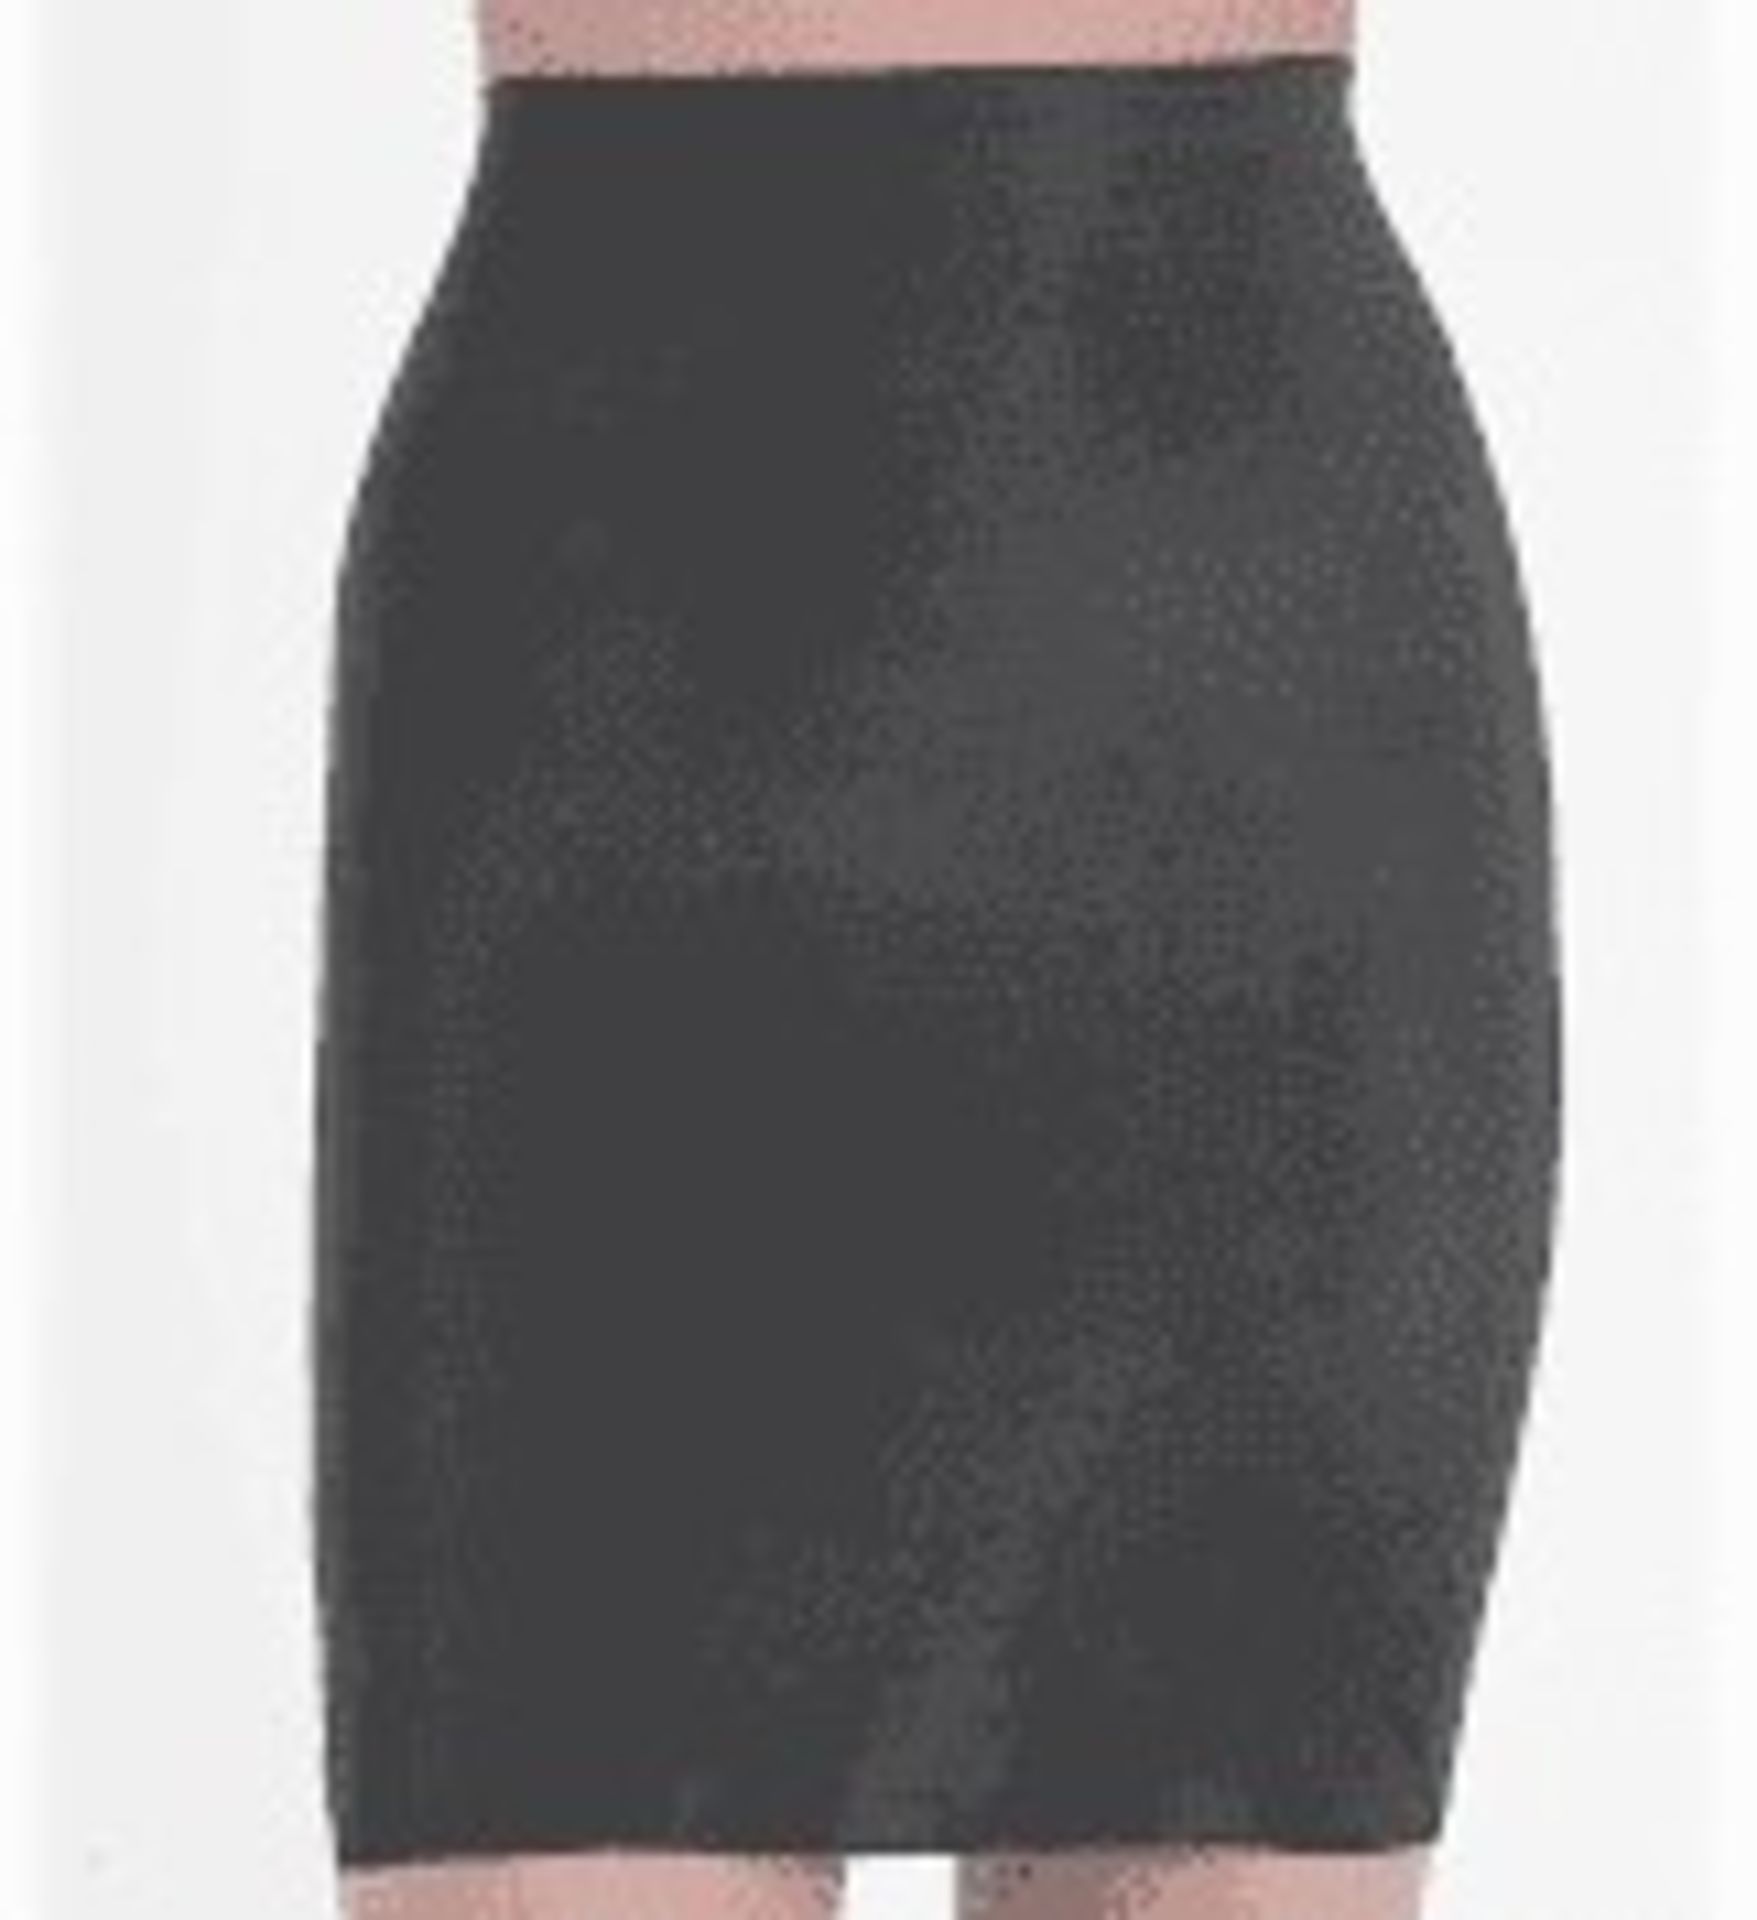 1 LOT TO CONTAIN 2 SPANX SKIRTS IN BLACK / SIZE MEDIUM / STYLE 028W / RRP £136.00 (PUBLIC VIEWING